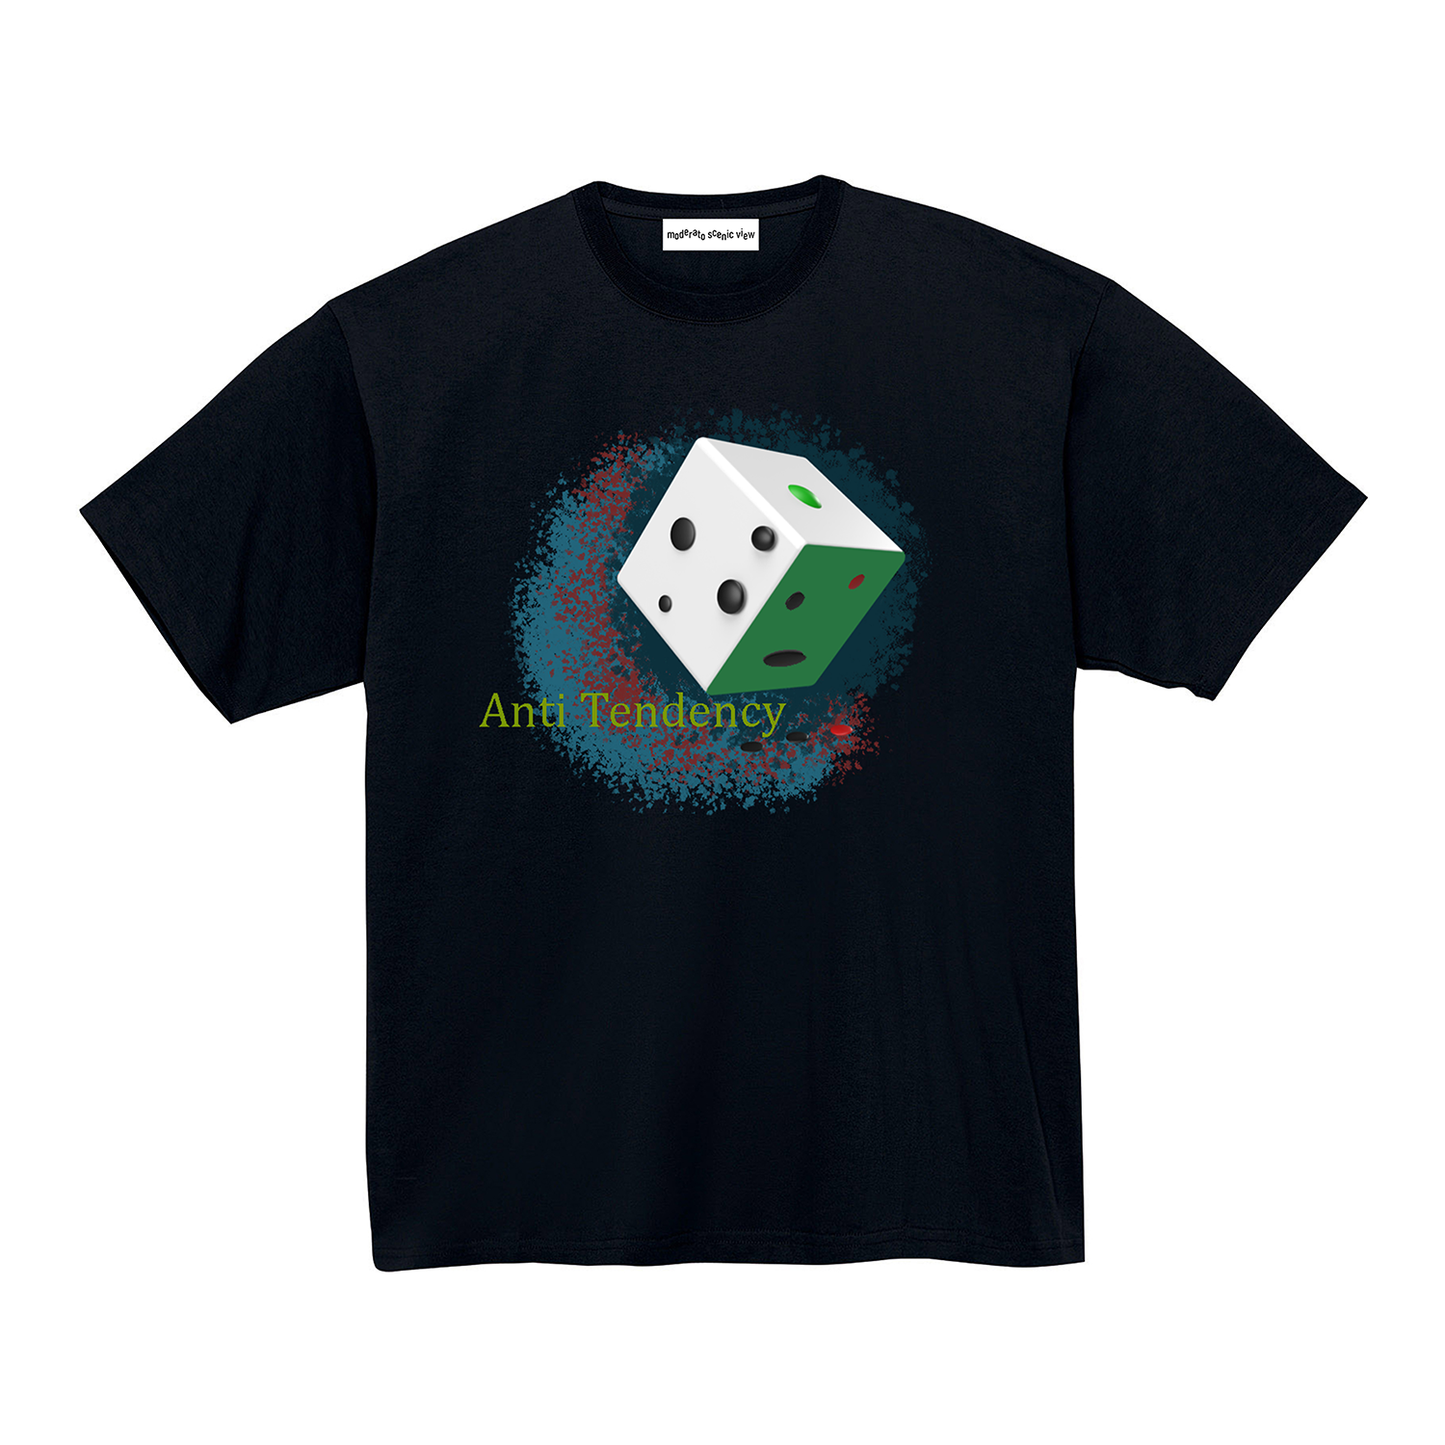 [moderato scenic view] T-shirts [Anti Tendency]